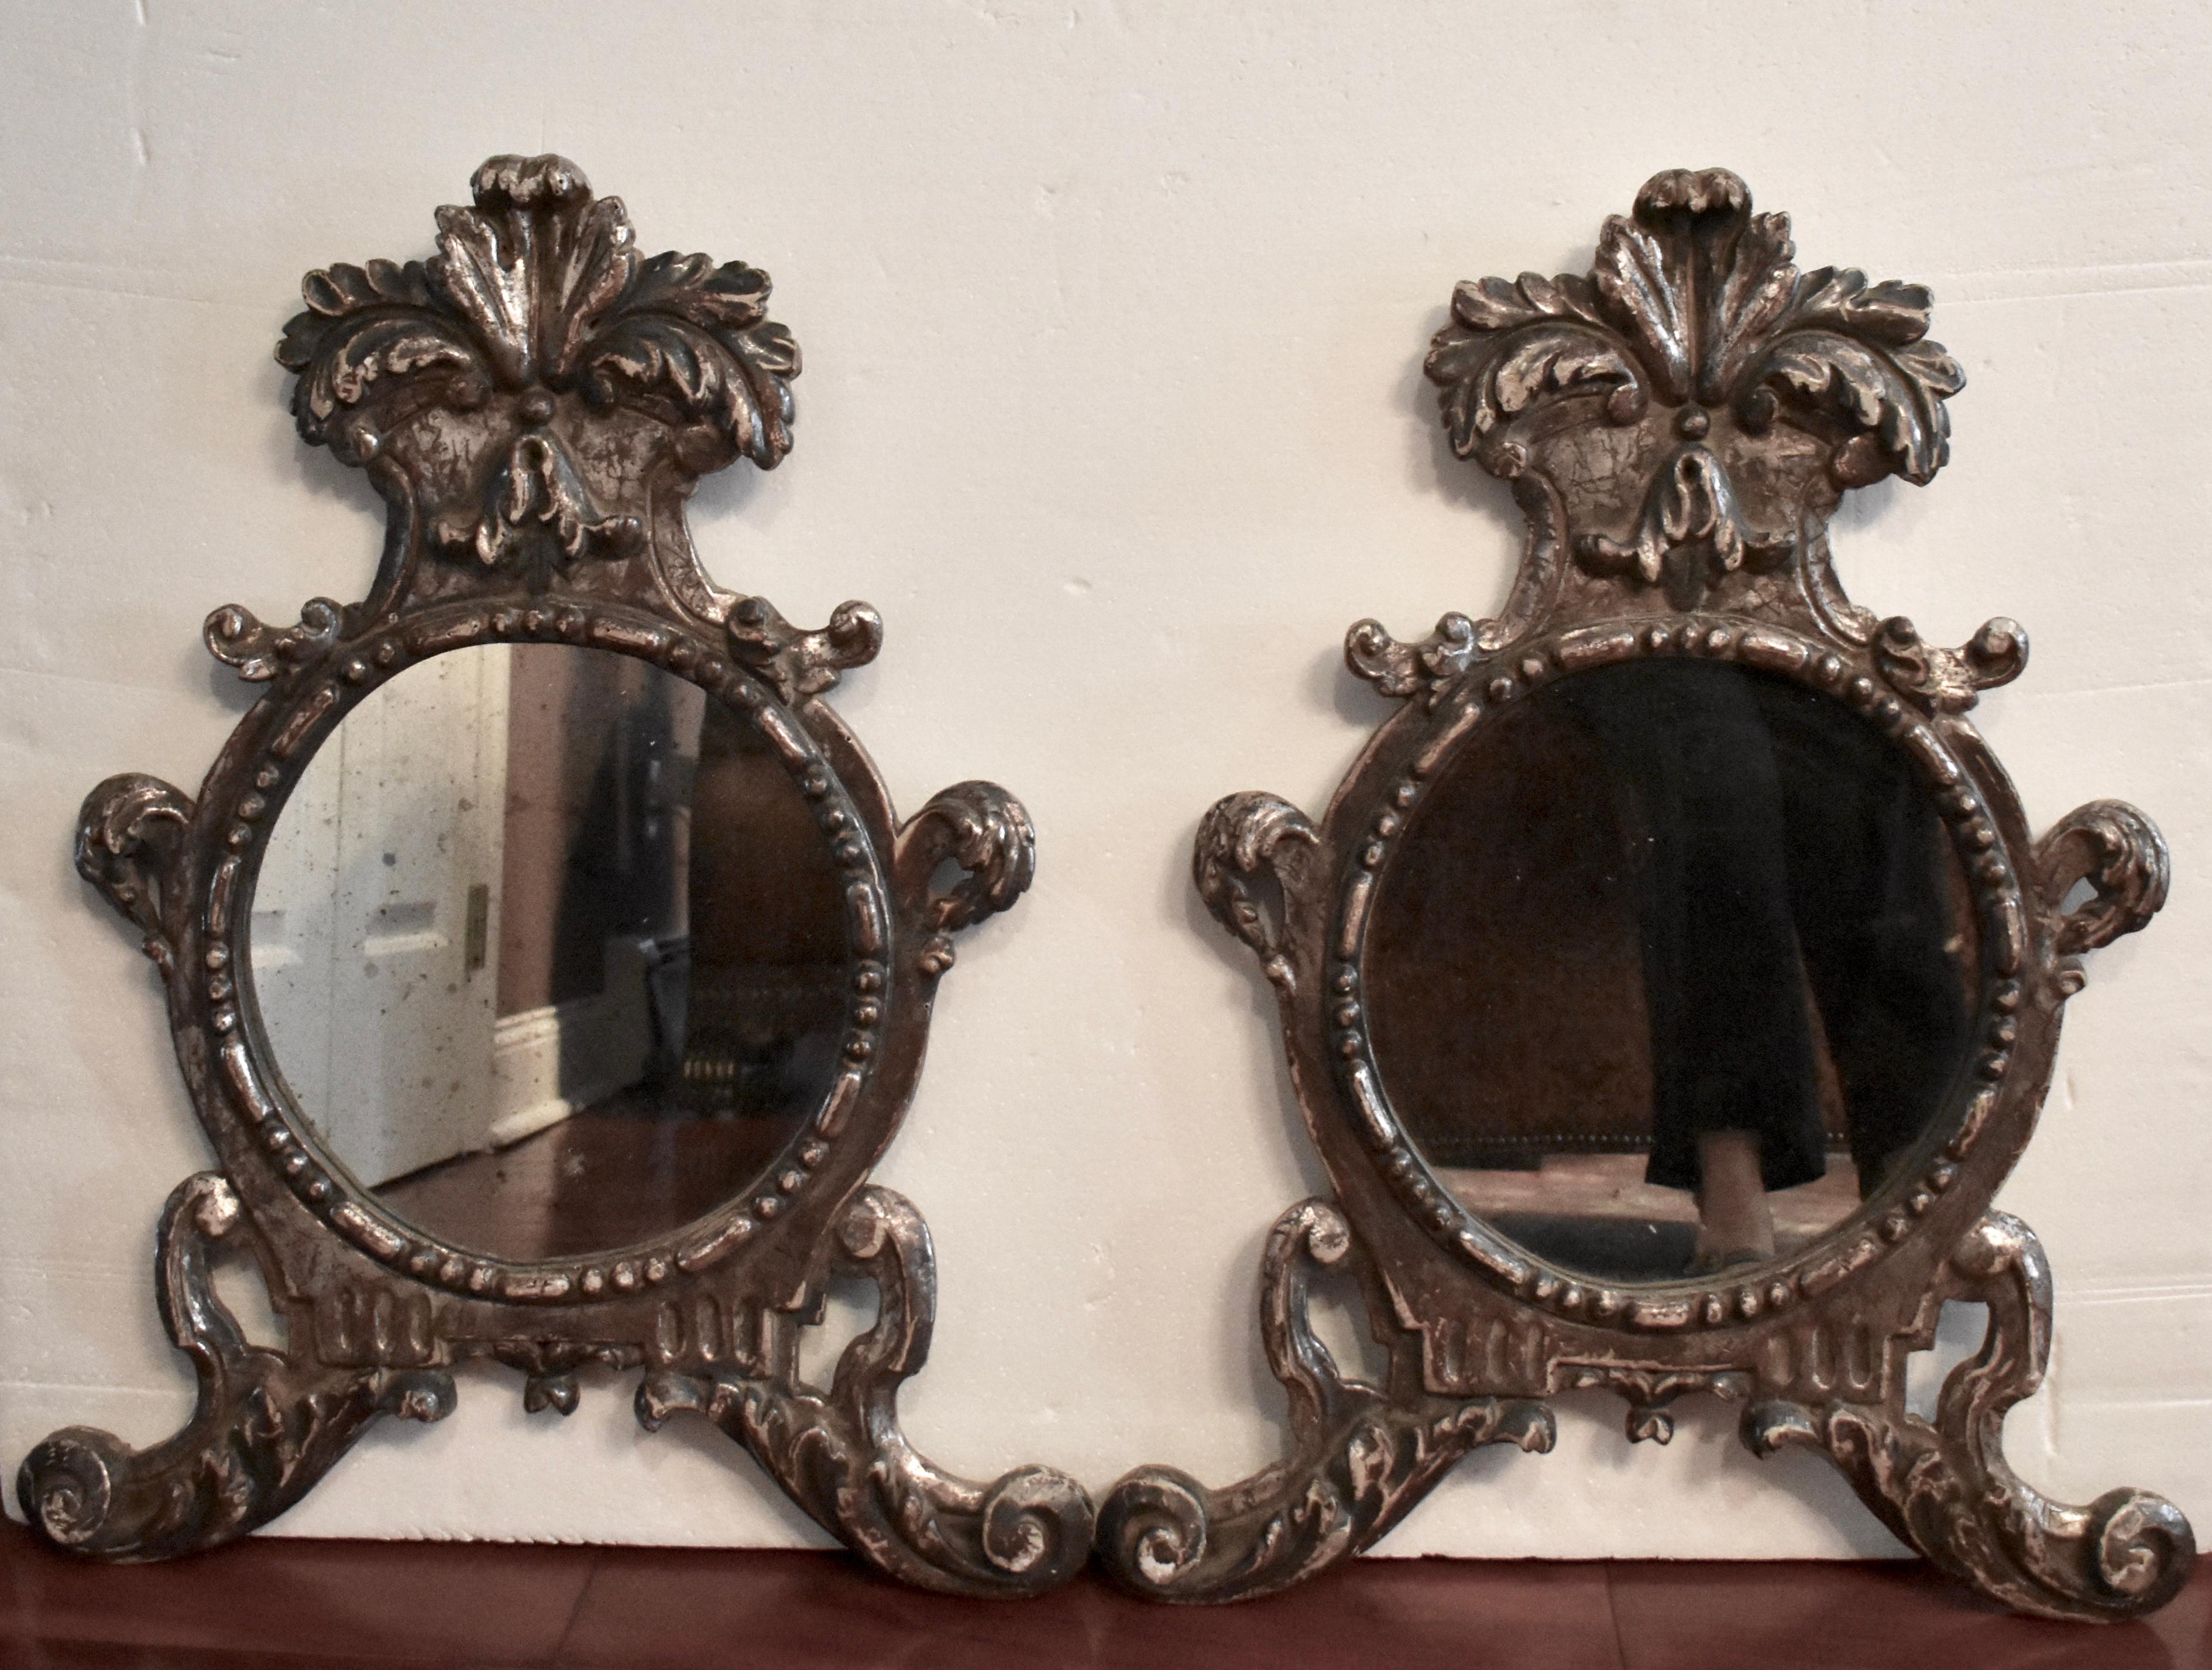 An unusual pair of silver-giltwood wall mirrors in the Baroque Taste, Italy, circa fourth quarter of the 19th century.

Topped with leaf-carved crests, the oval mirror plates are framed with beading, and sit on scrolled, leaf-carved and pierced